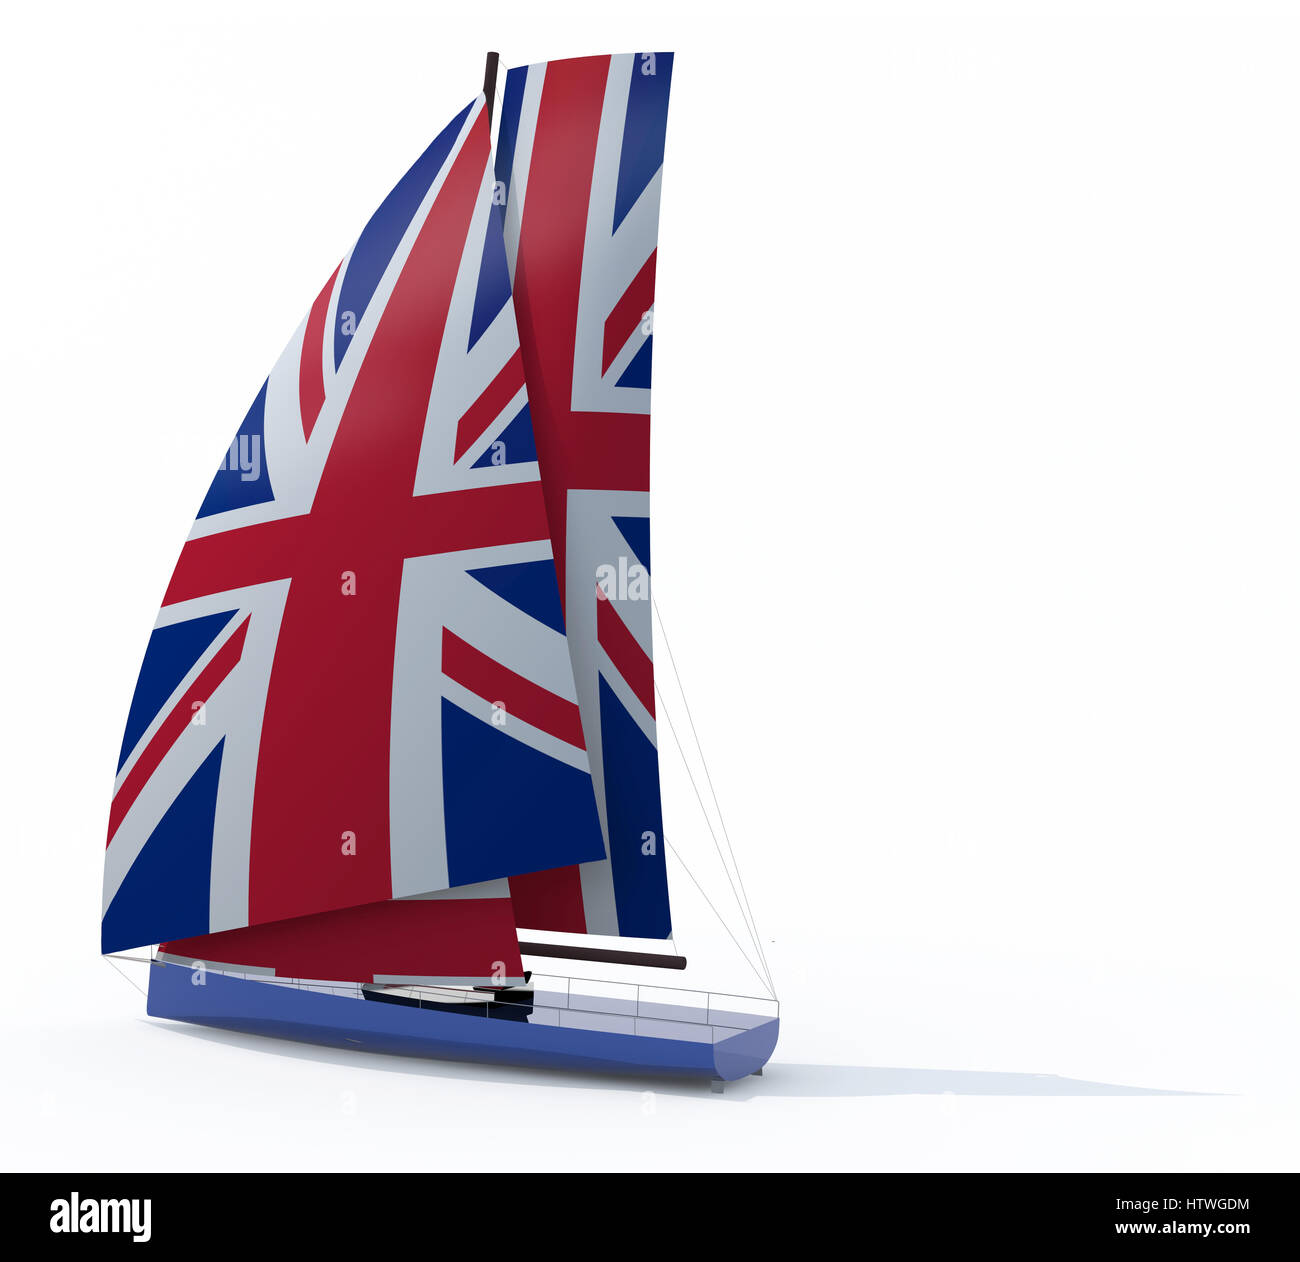 sailboat with sail colored as UK flag, 3d illustration Stock Photo